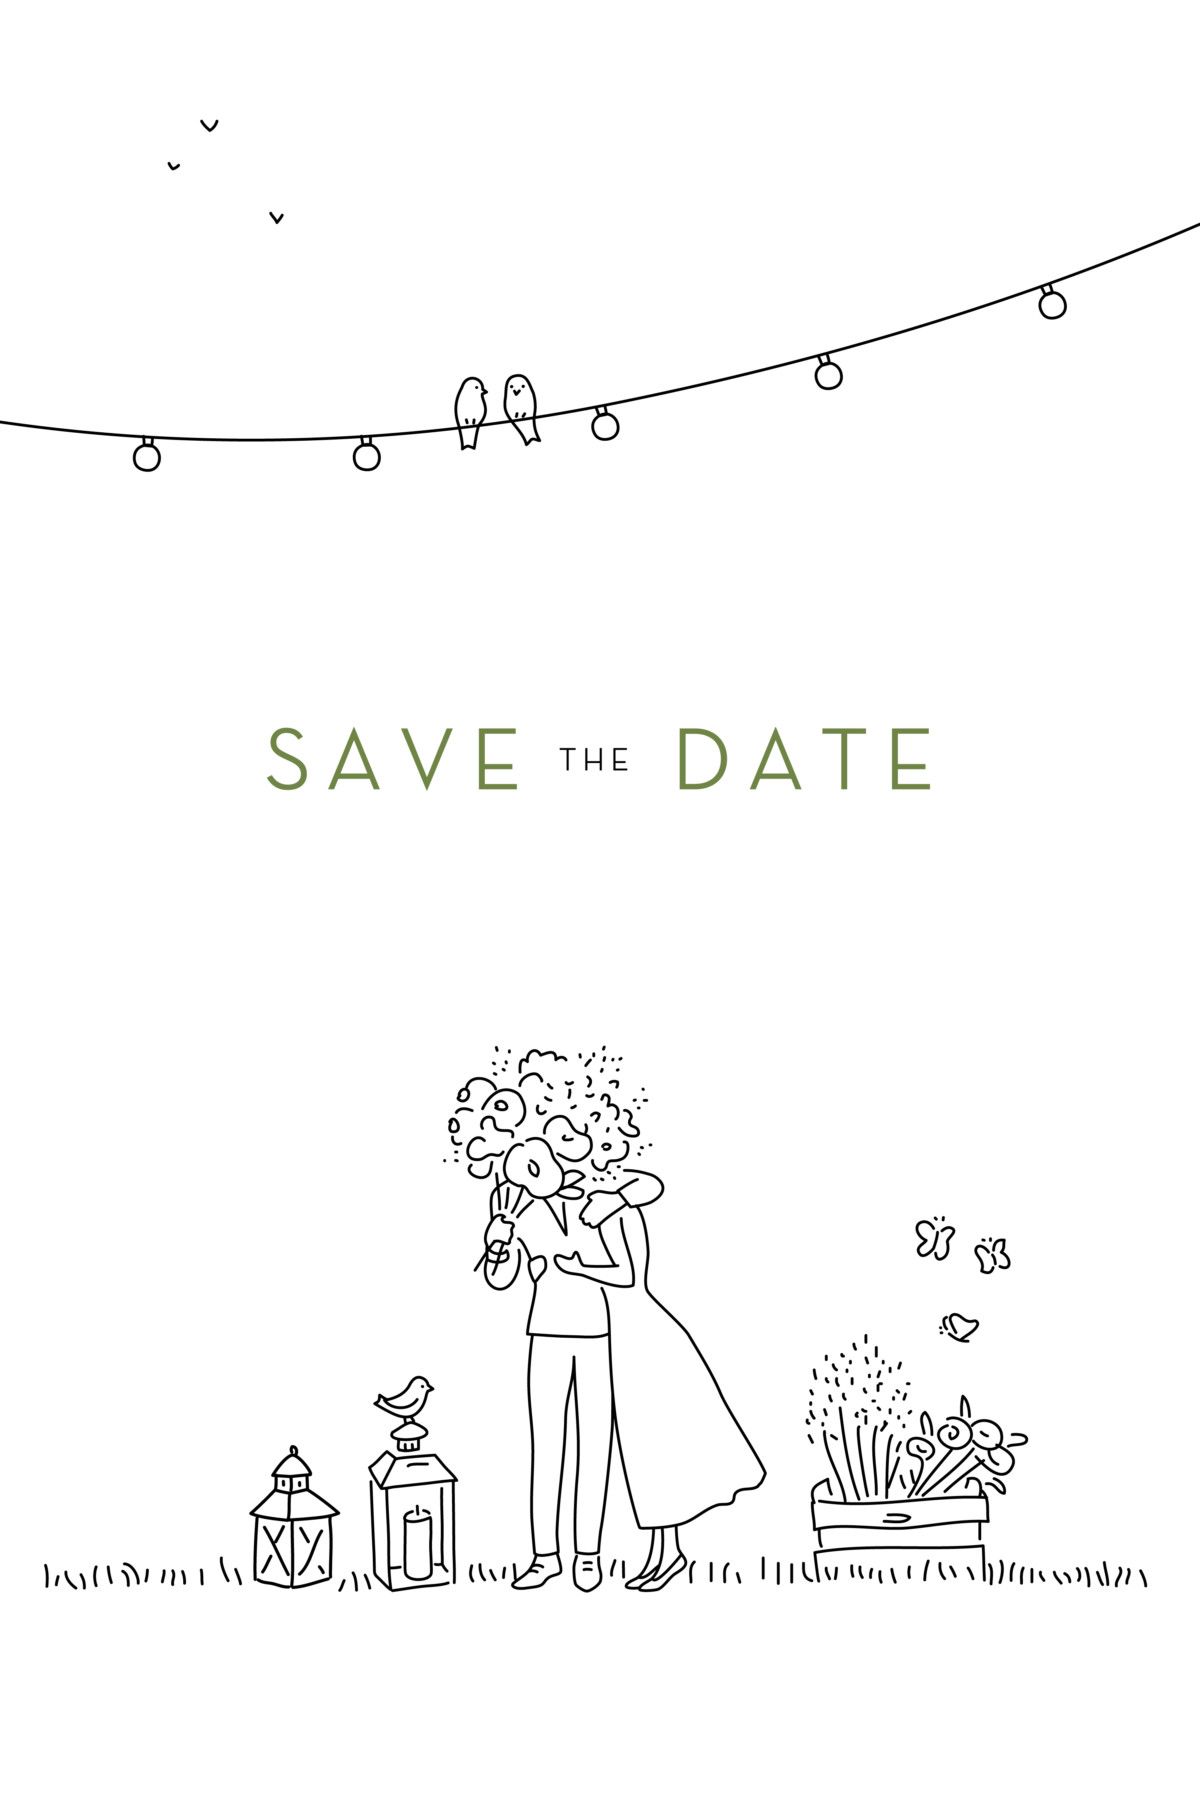 Creative and Unusual Save The Date Card Examples